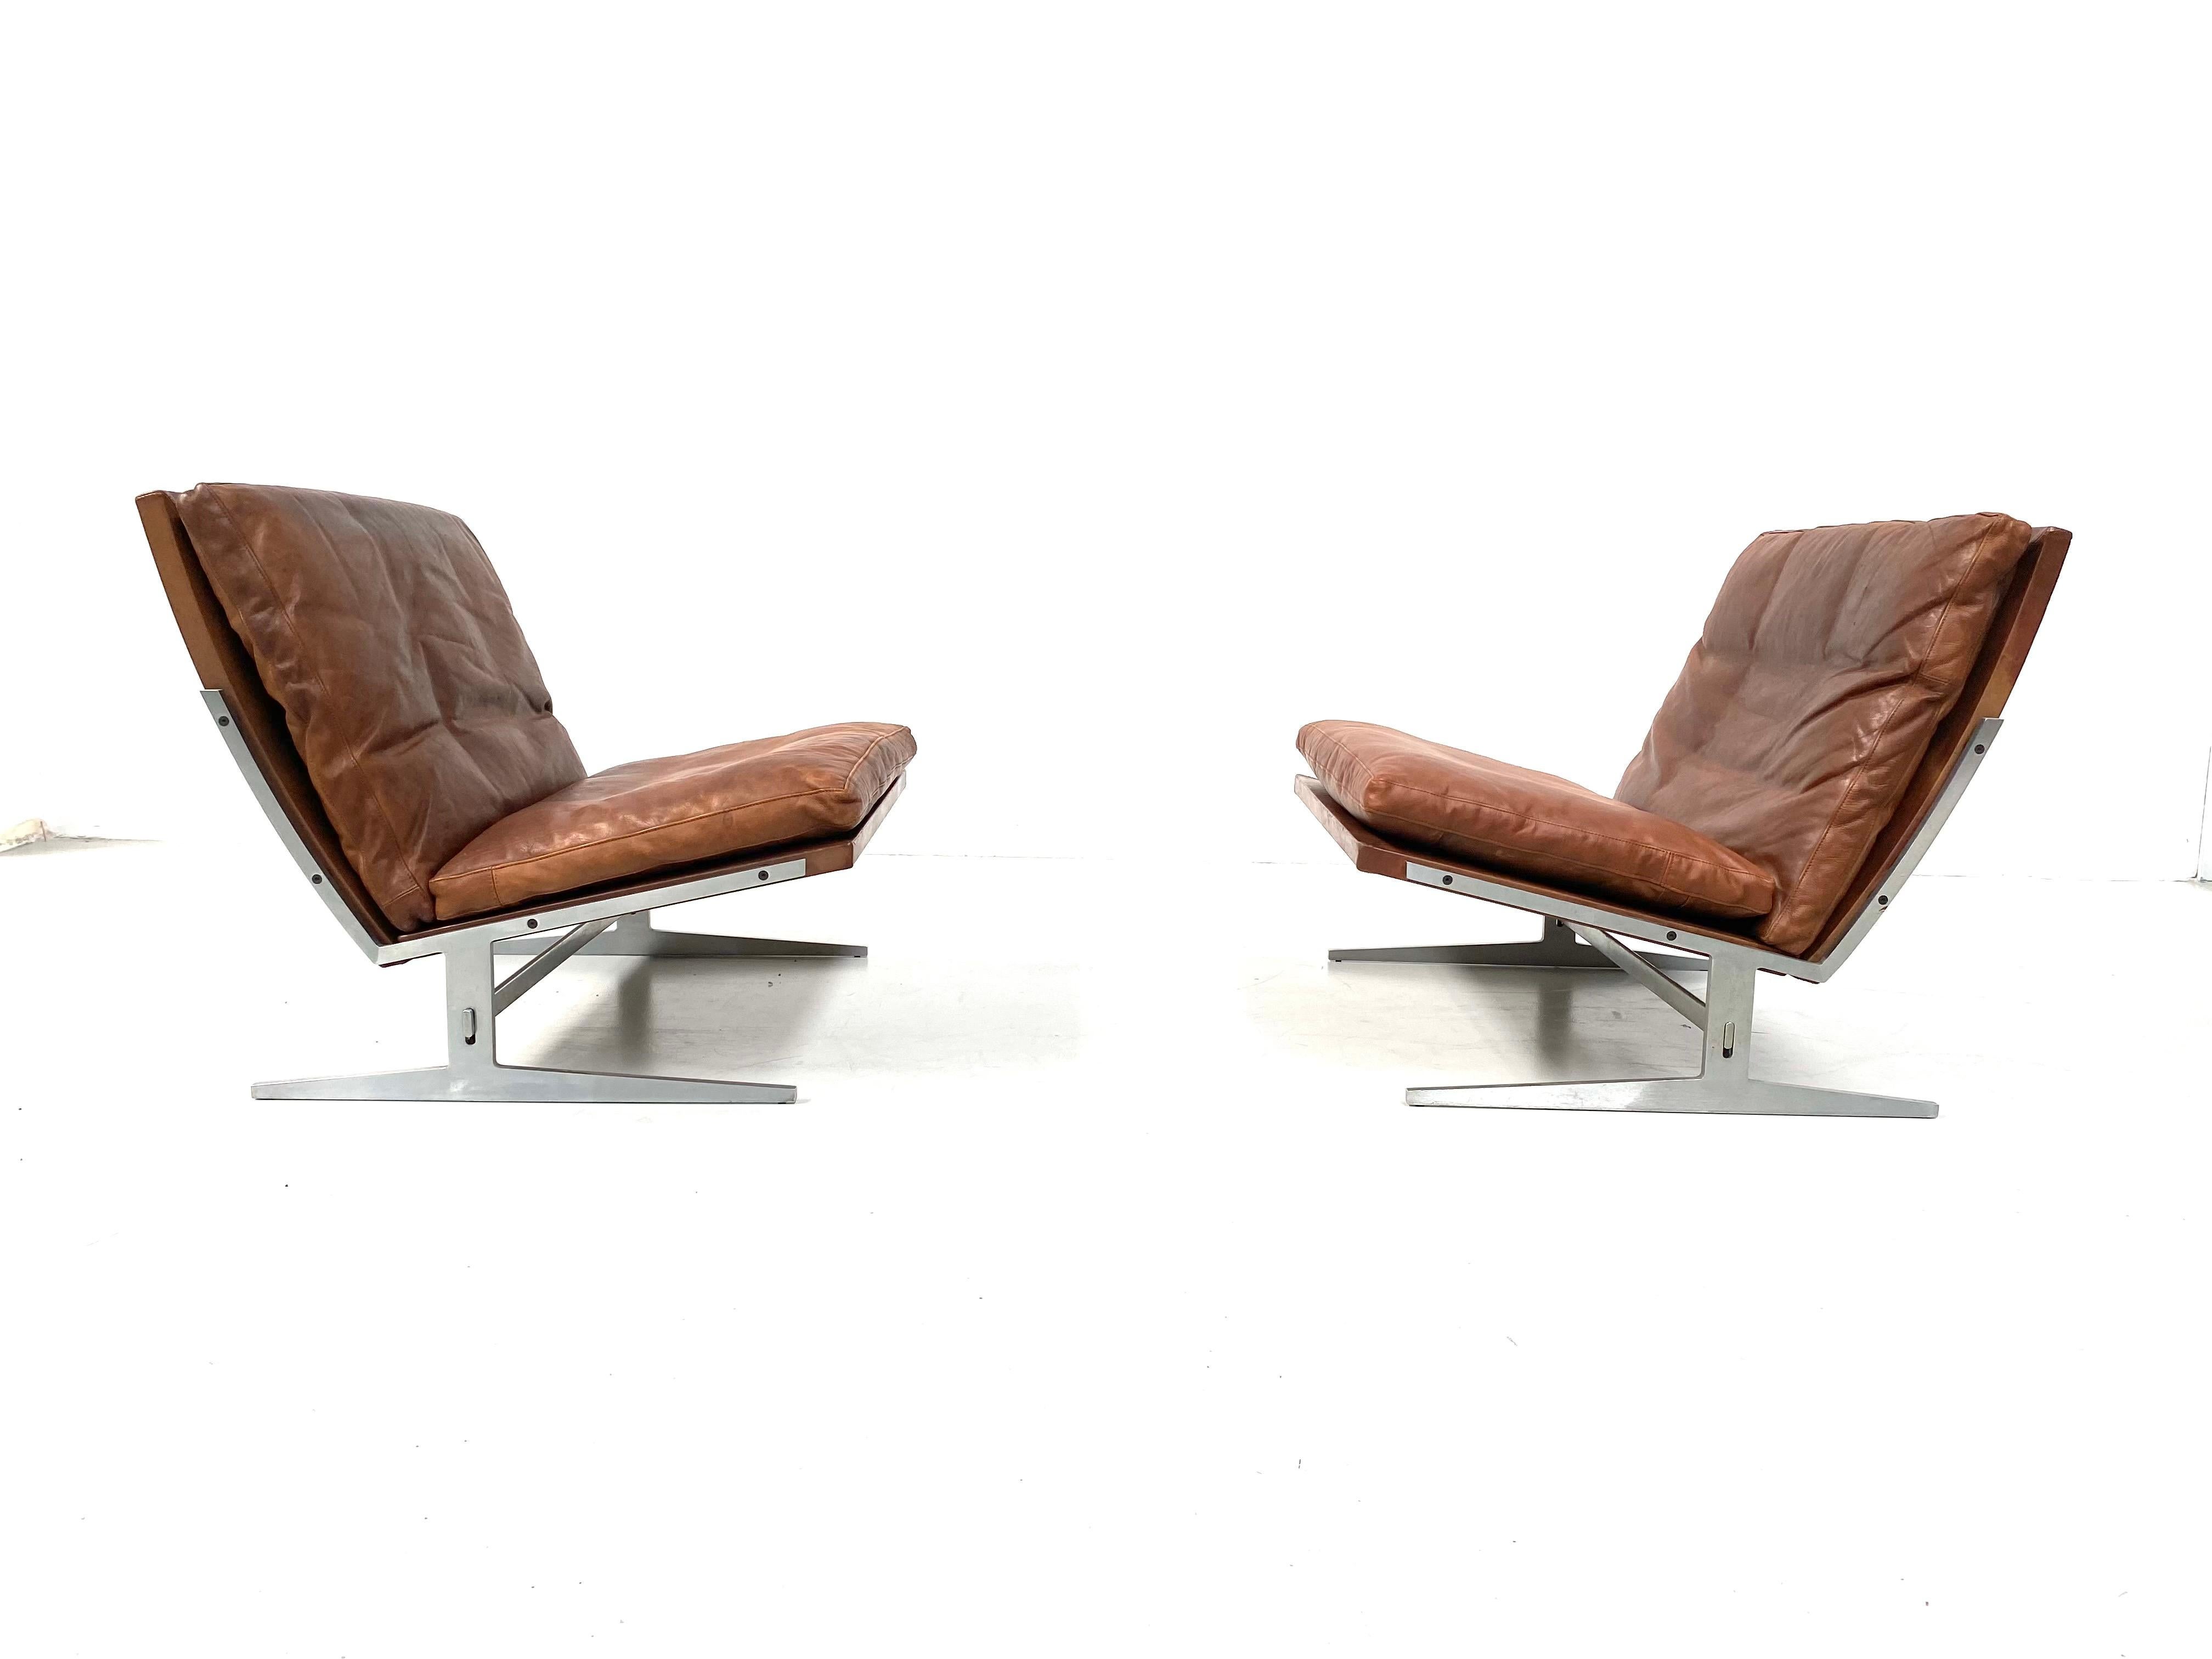 20th Century Danish BO-561 Lounge Chairs in Cognac by Fabricius and Kastholm for BoEx, 1960s